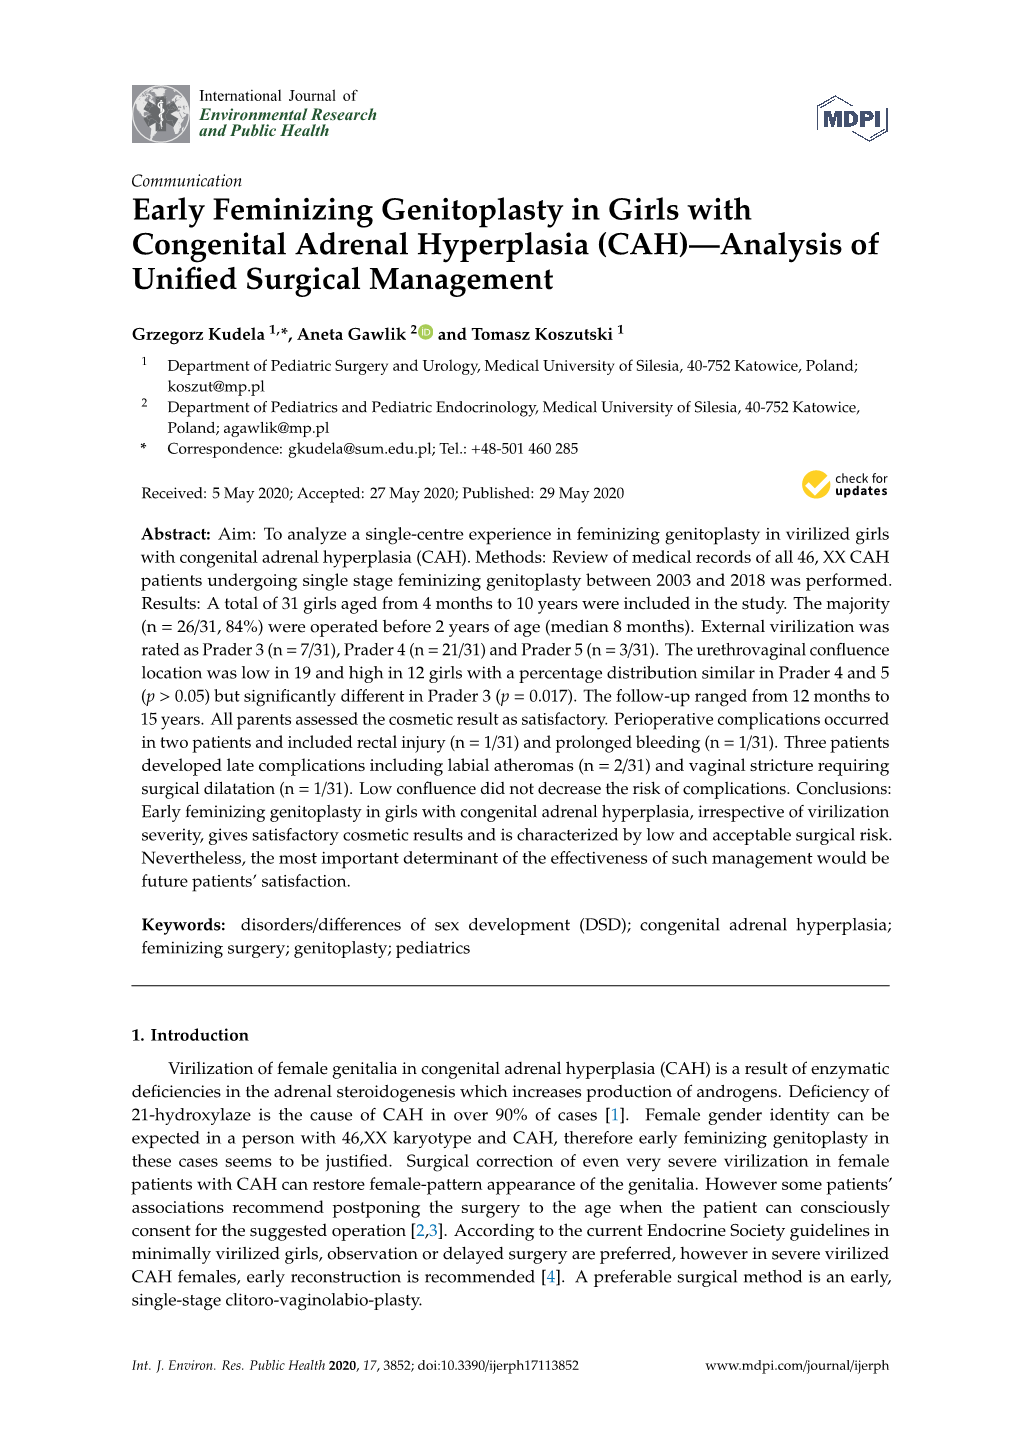 Early Feminizing Genitoplasty in Girls with Congenital Adrenal Hyperplasia (CAH)—Analysis of Uniﬁed Surgical Management